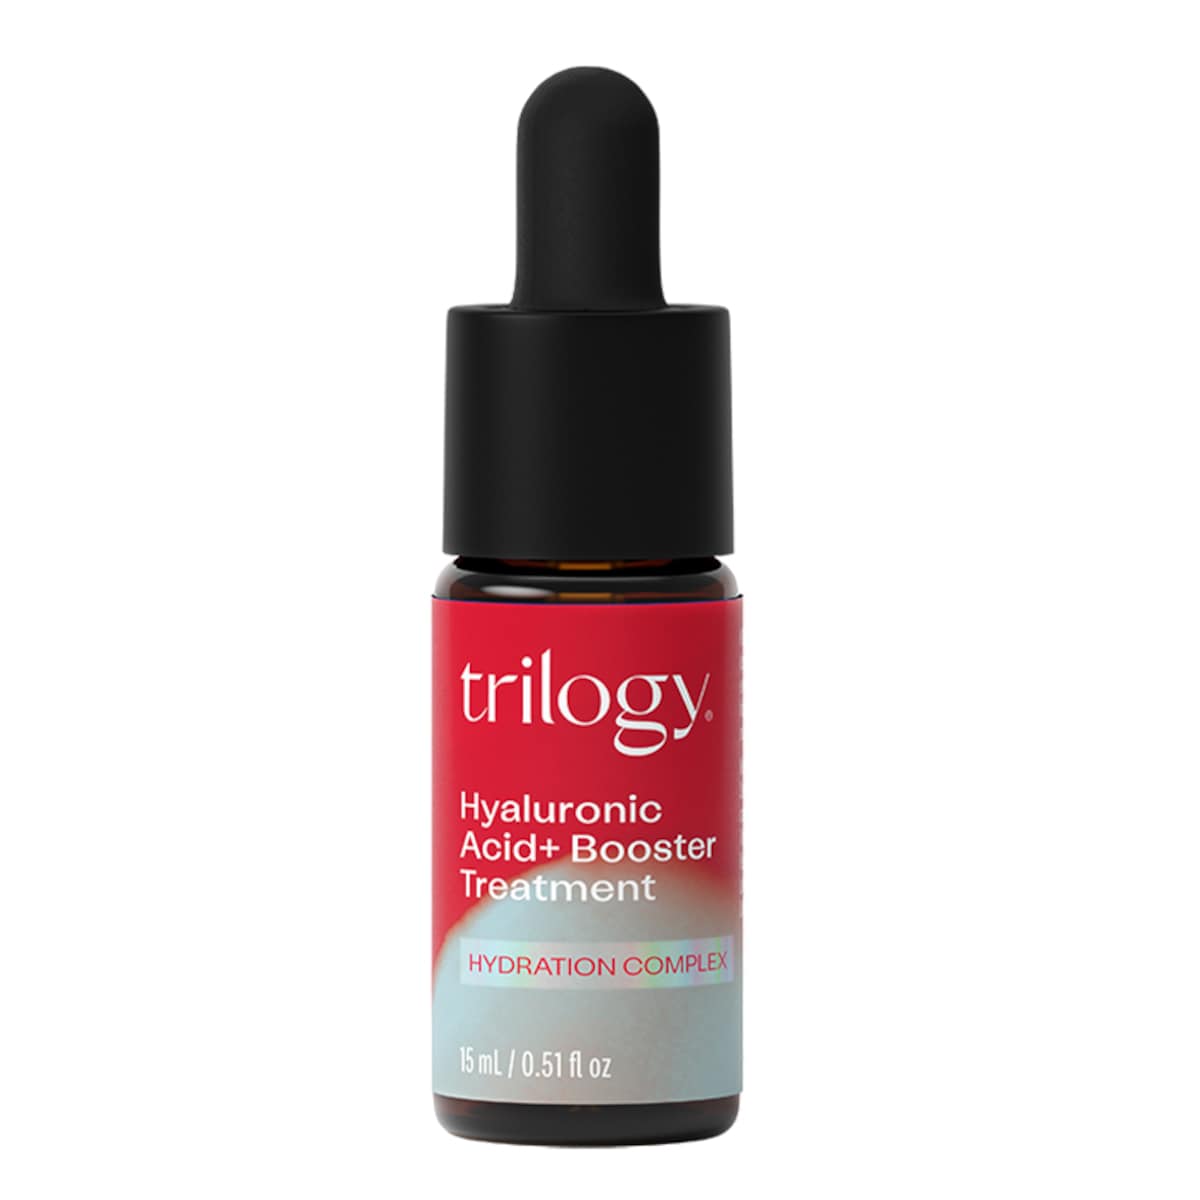 Trilogy Hyaluronic Acid + Booster Treatment 15ml